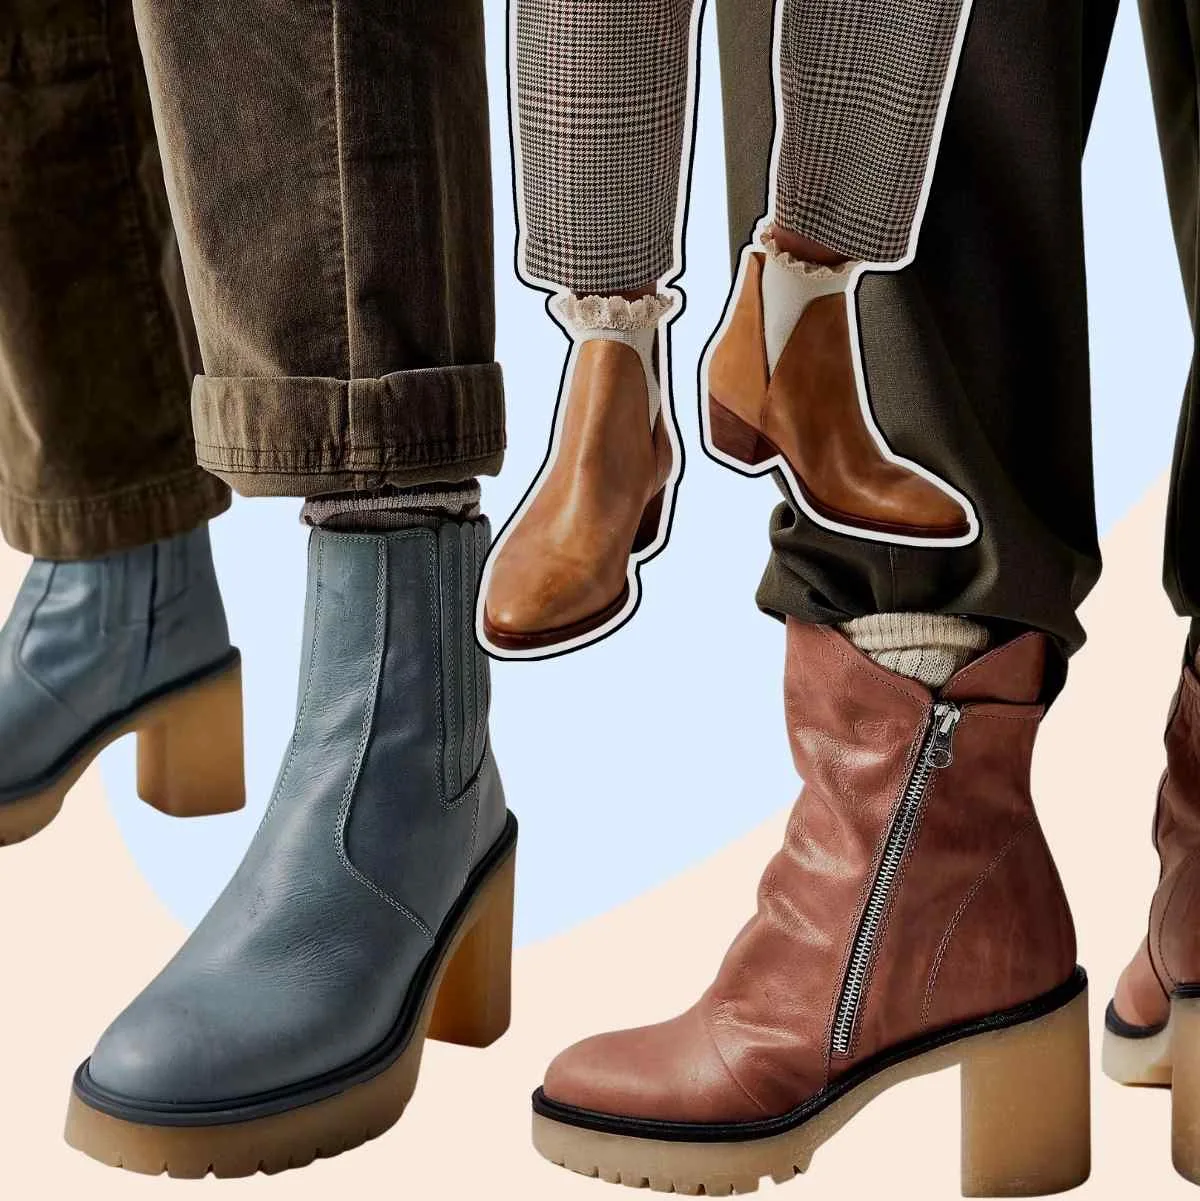 How to Wear Ankle Boots With Your Pants - An easy guide - The Joy of Style